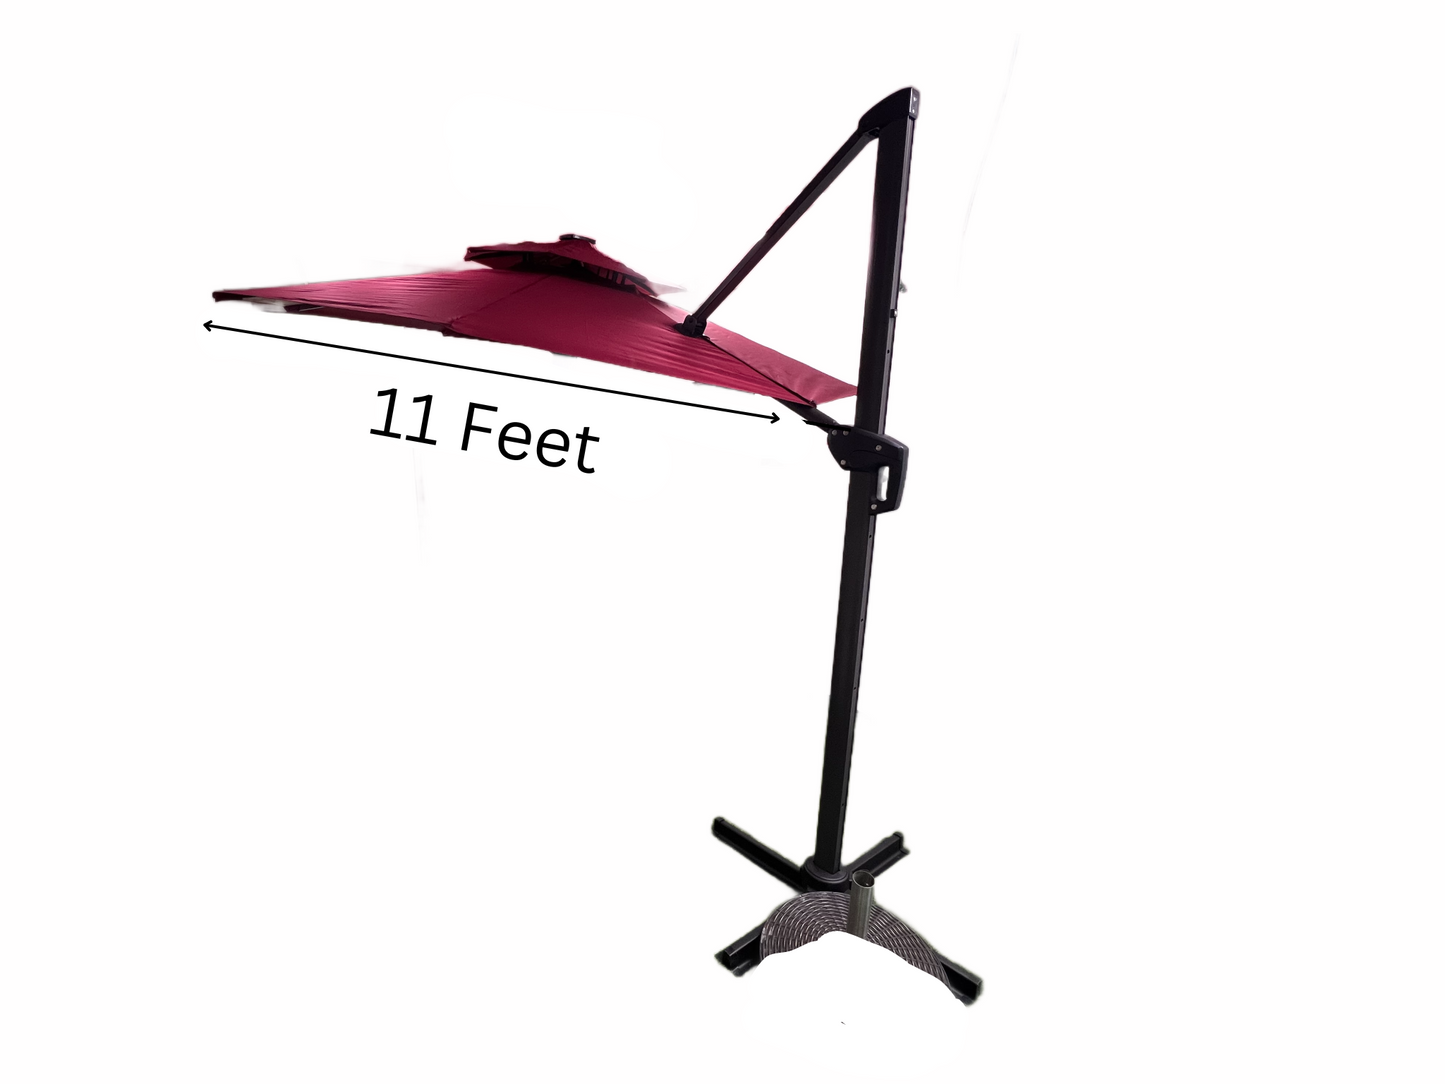 MMW 9Ft Outdoor Cantilever Umbrella, Solar Powered, LED Lights, Aluminum Umbrella 360° Rotation w/ Bluetooth Speakers for Patio, Backyard, Poolside, Lawn, Garden, Wine Red